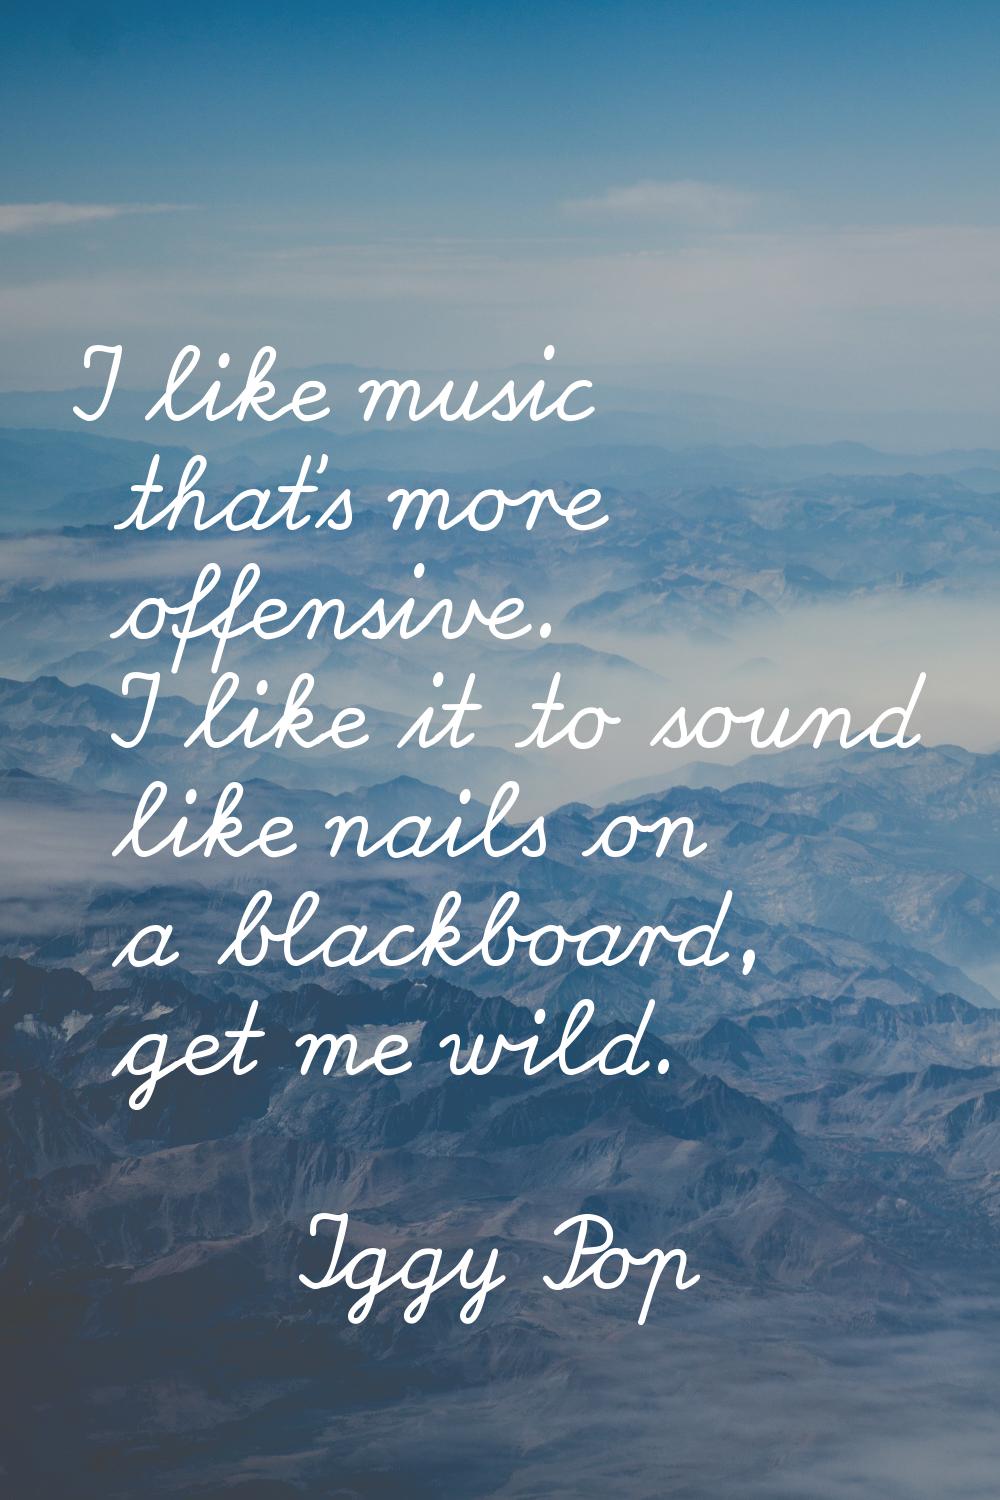 I like music that's more offensive. I like it to sound like nails on a blackboard, get me wild.